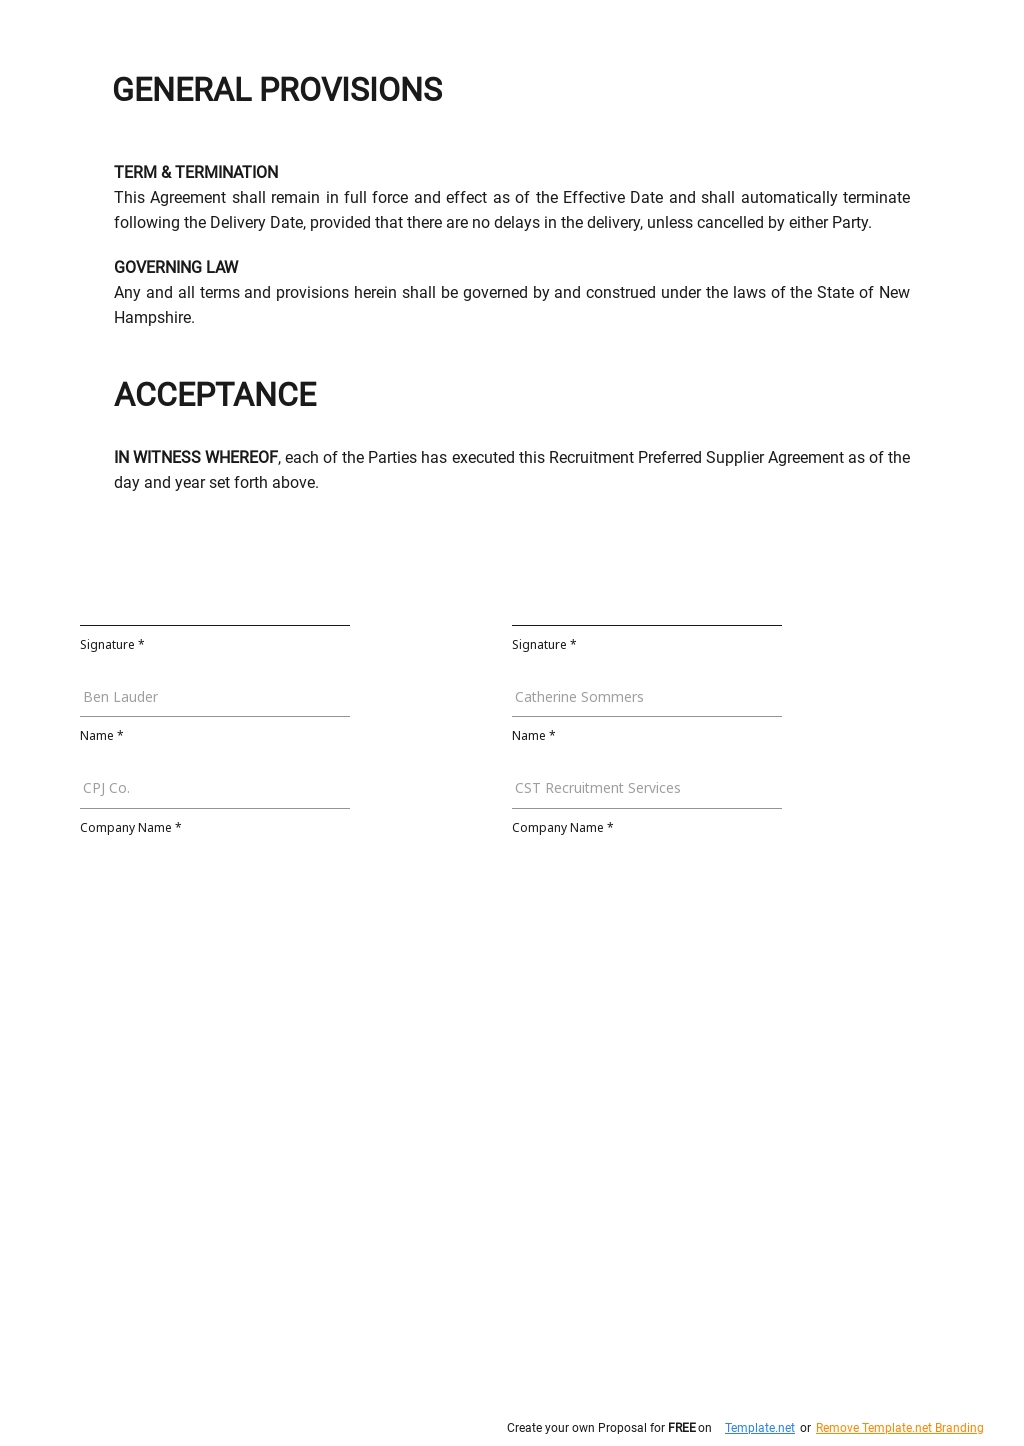 Recruitment Preferred Supplier Agreement Template - Google Docs Pertaining To preferred supplier agreement template